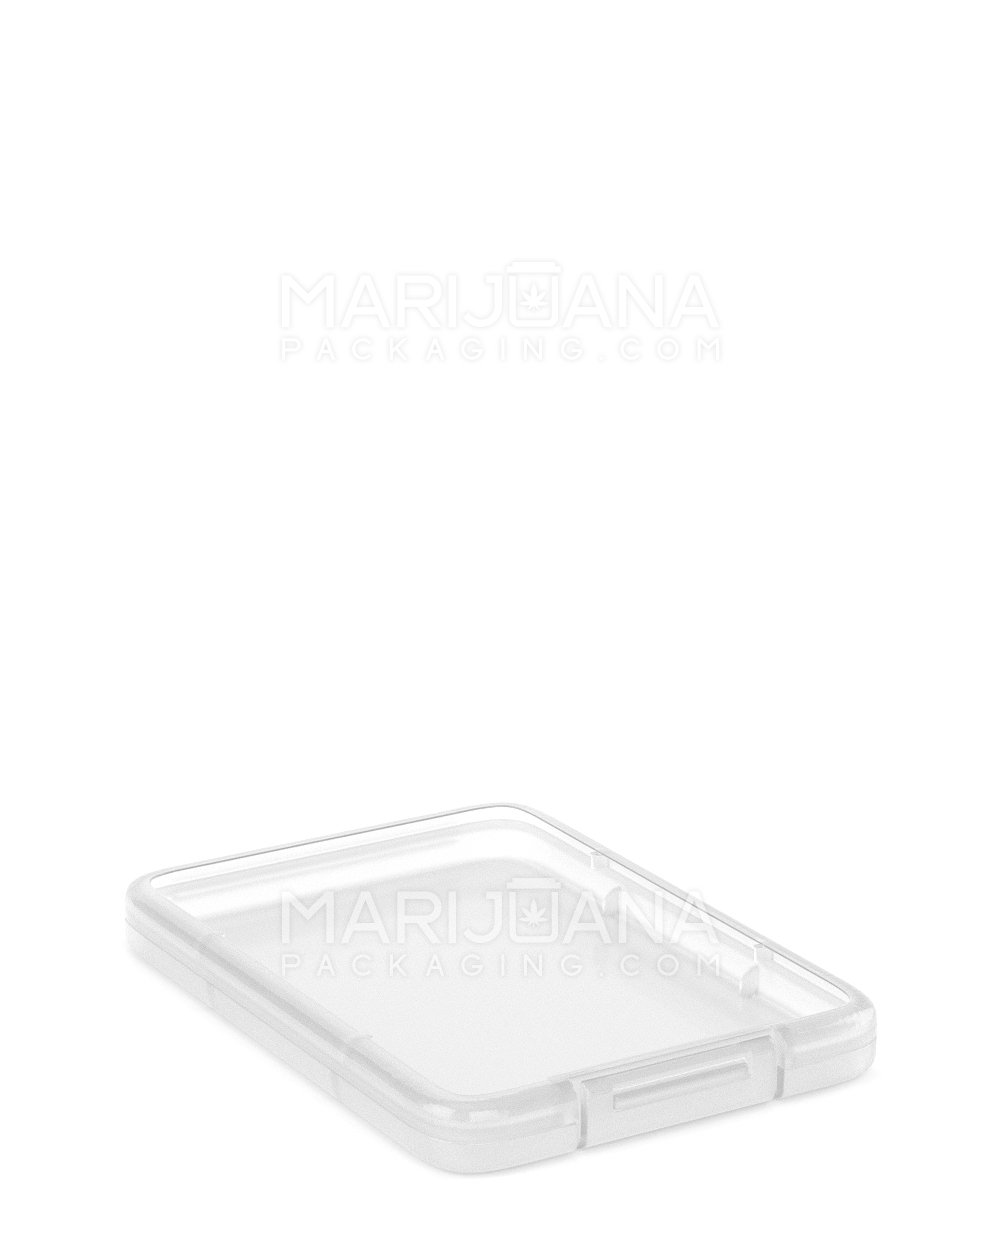 Hinged Lid Slim Shatter Container | 5.3mm - Clear Plastic - 1000 Count - 6